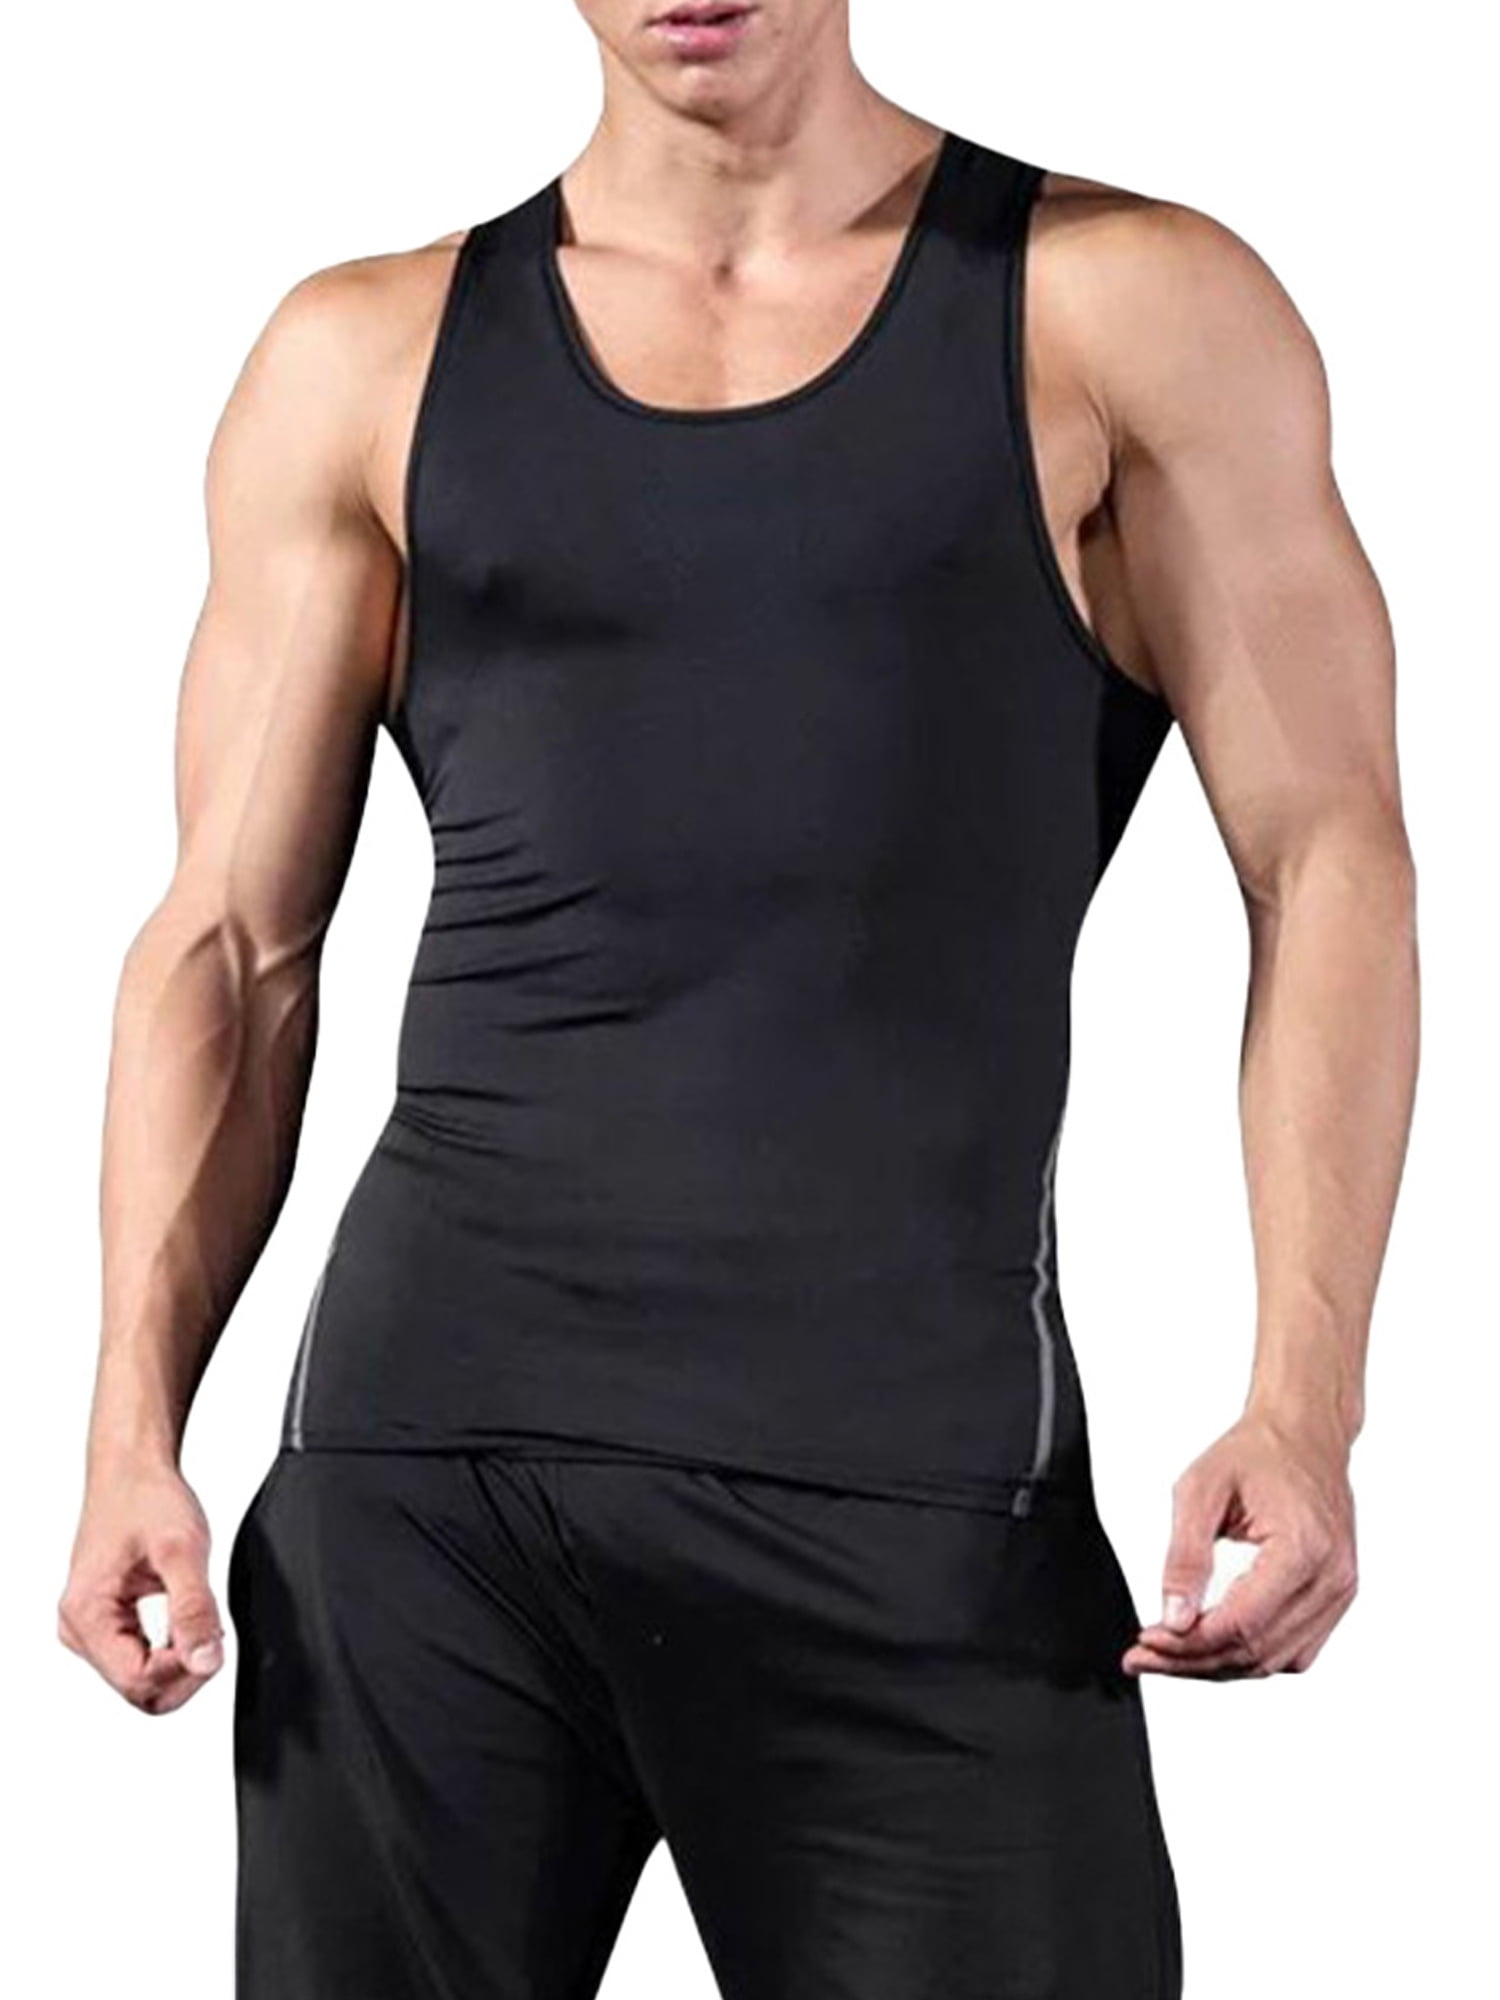 Men Gym Running Sport Body Compression Base Layers Quick Dry Top Tank Vest Shirt 